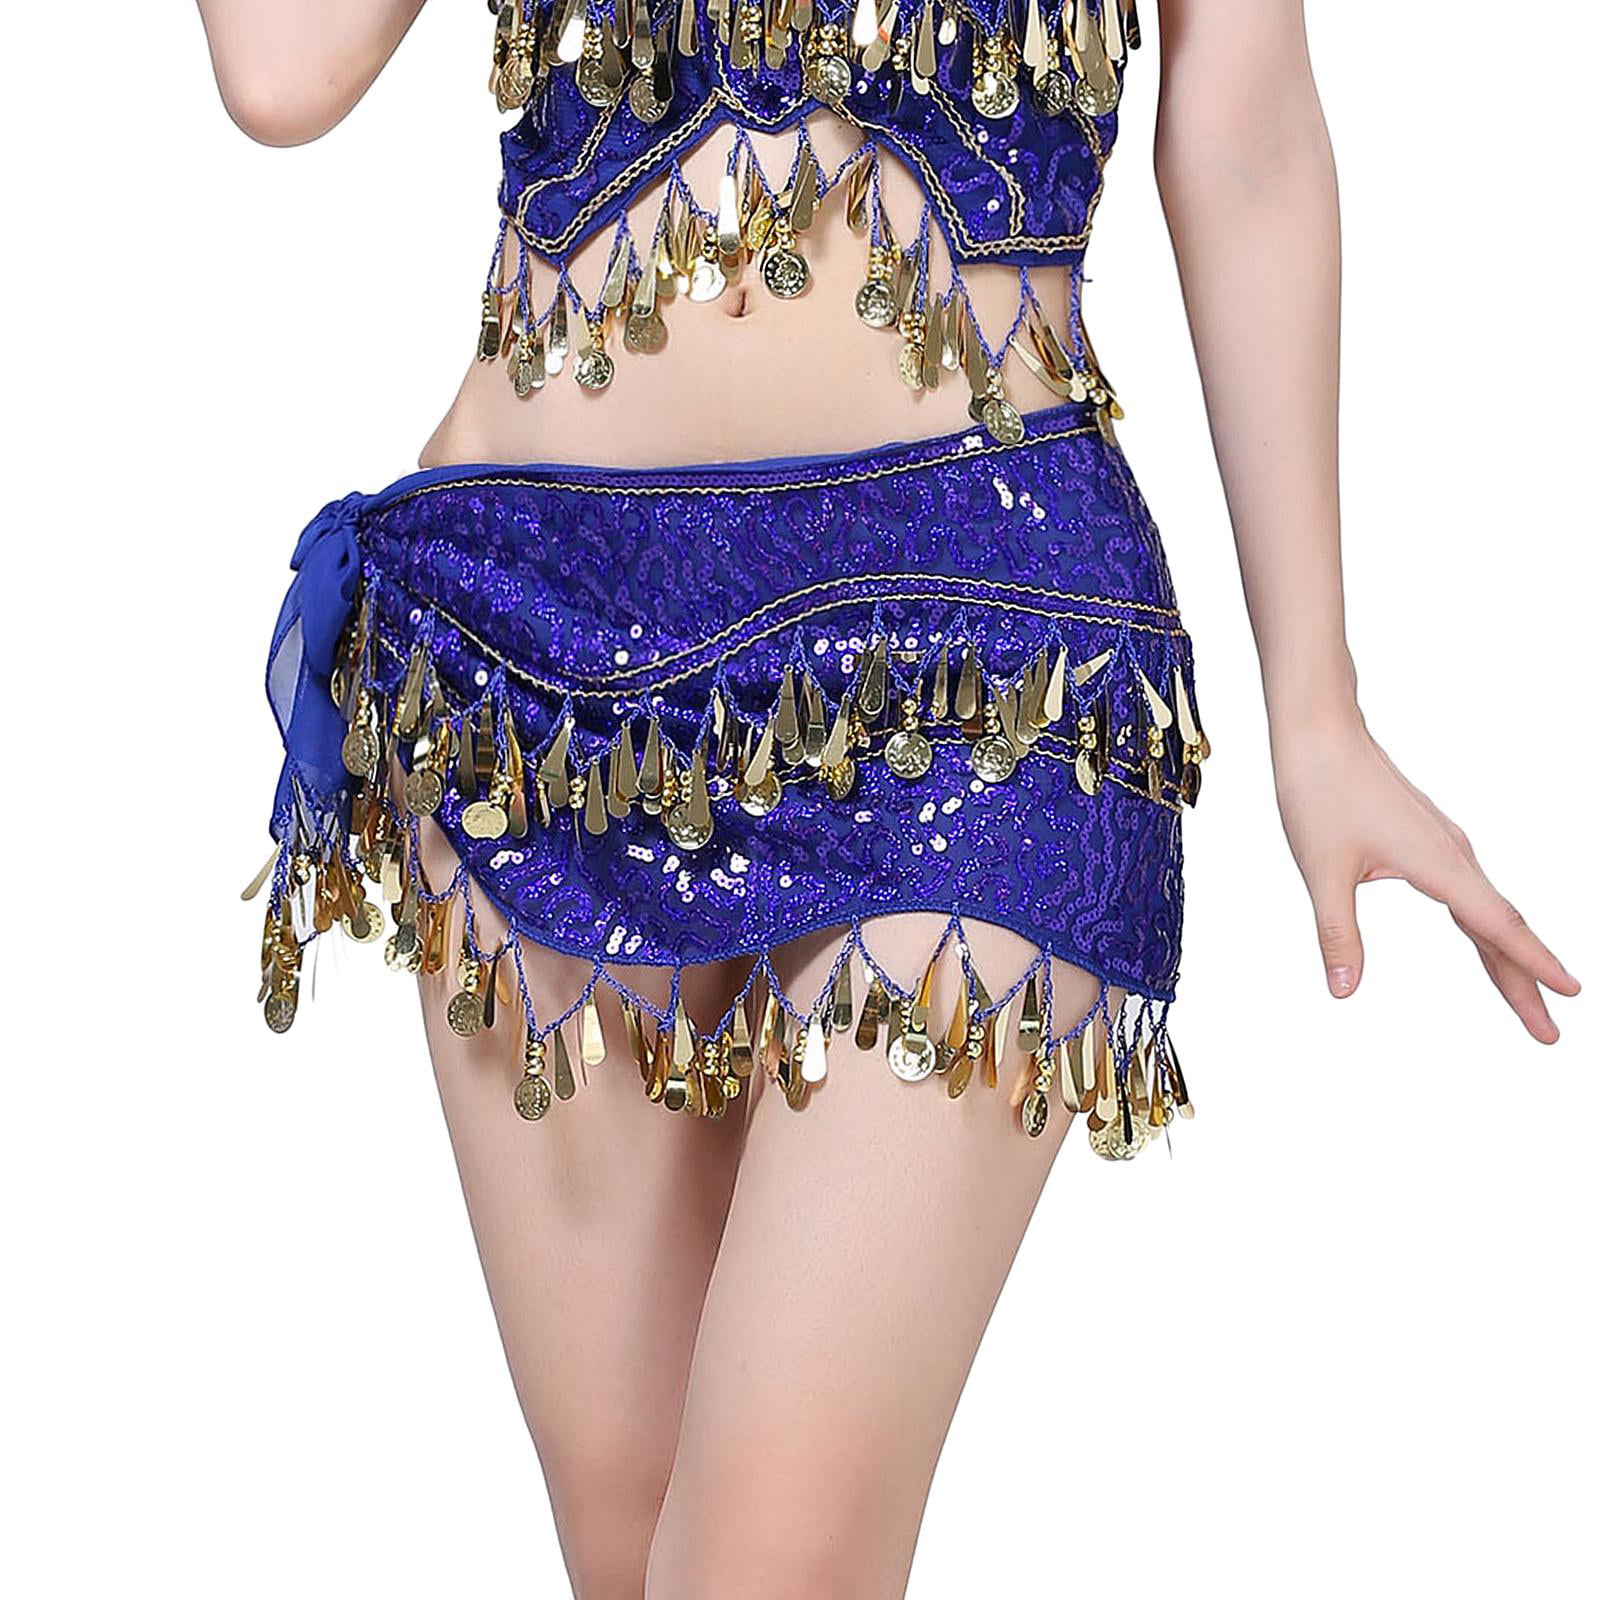 Arabic Belly Dance Costumes Beaded Top Belt Festival Party Fancy Carnival Outfit 